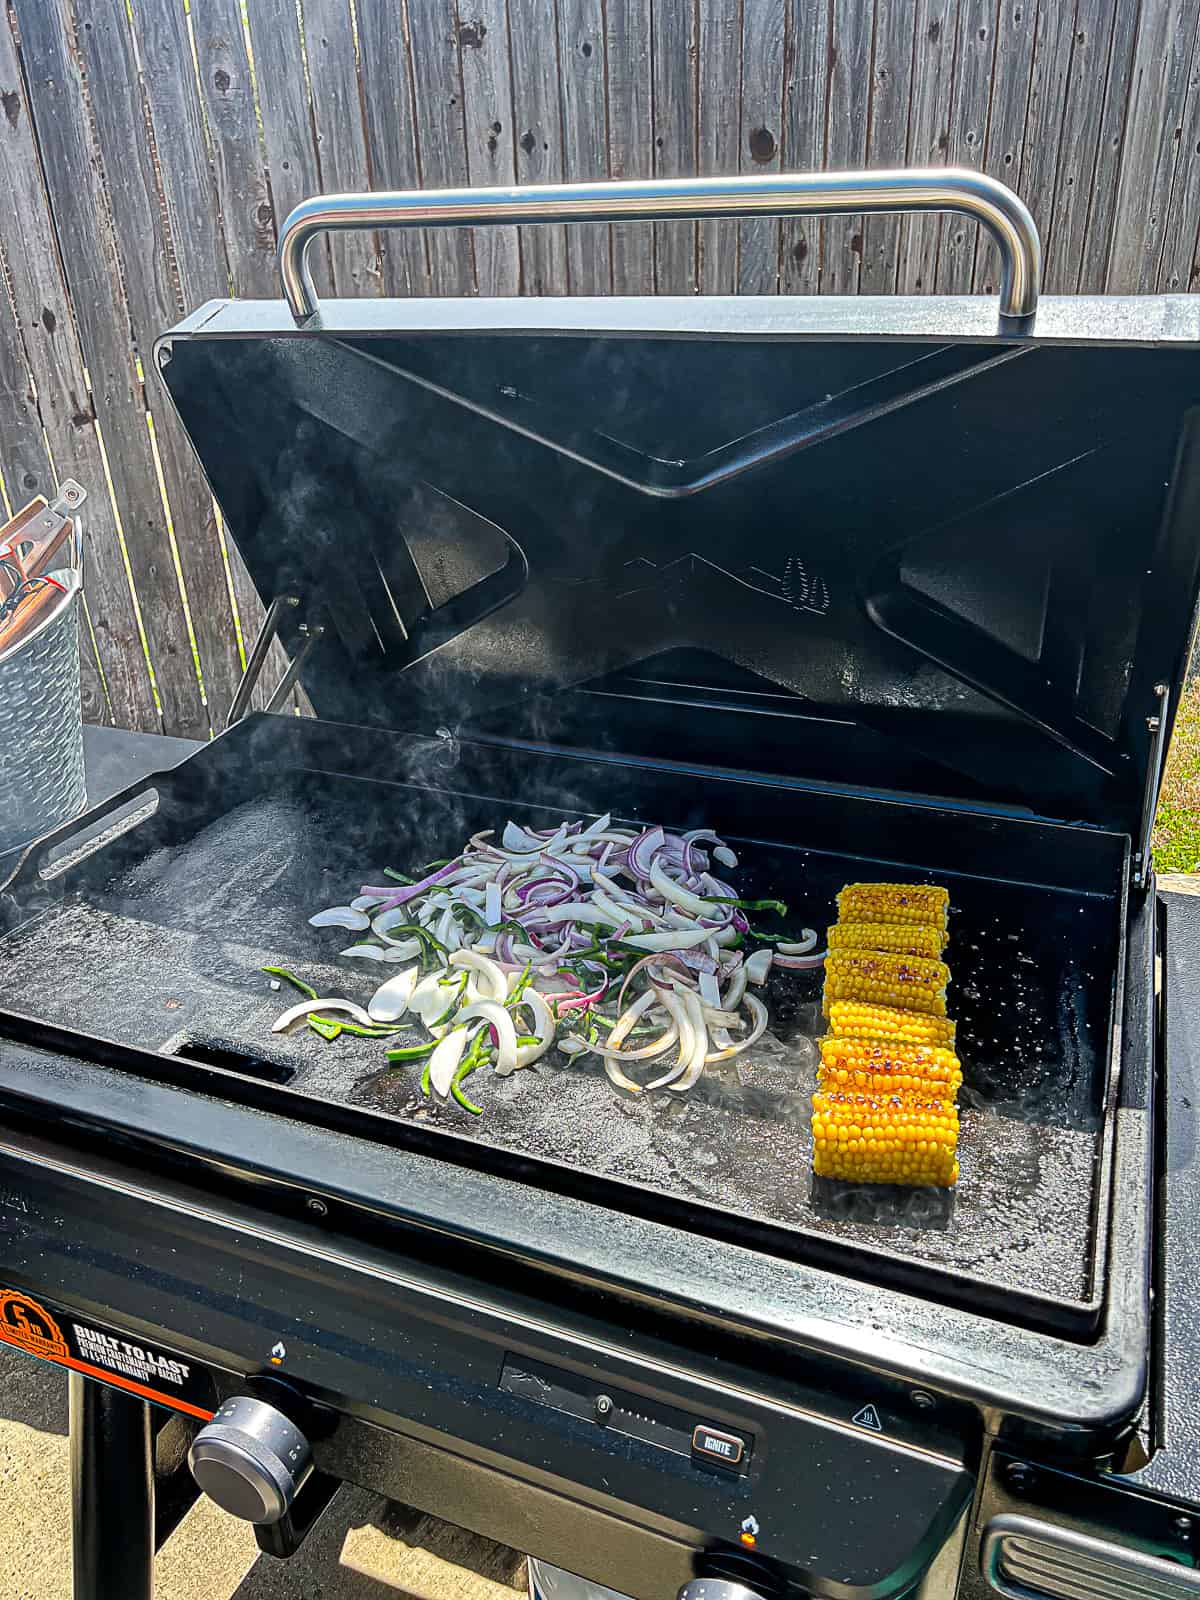 Traeger Griddle Cooking Vegetables for Steak Fajitas with corn on the cob